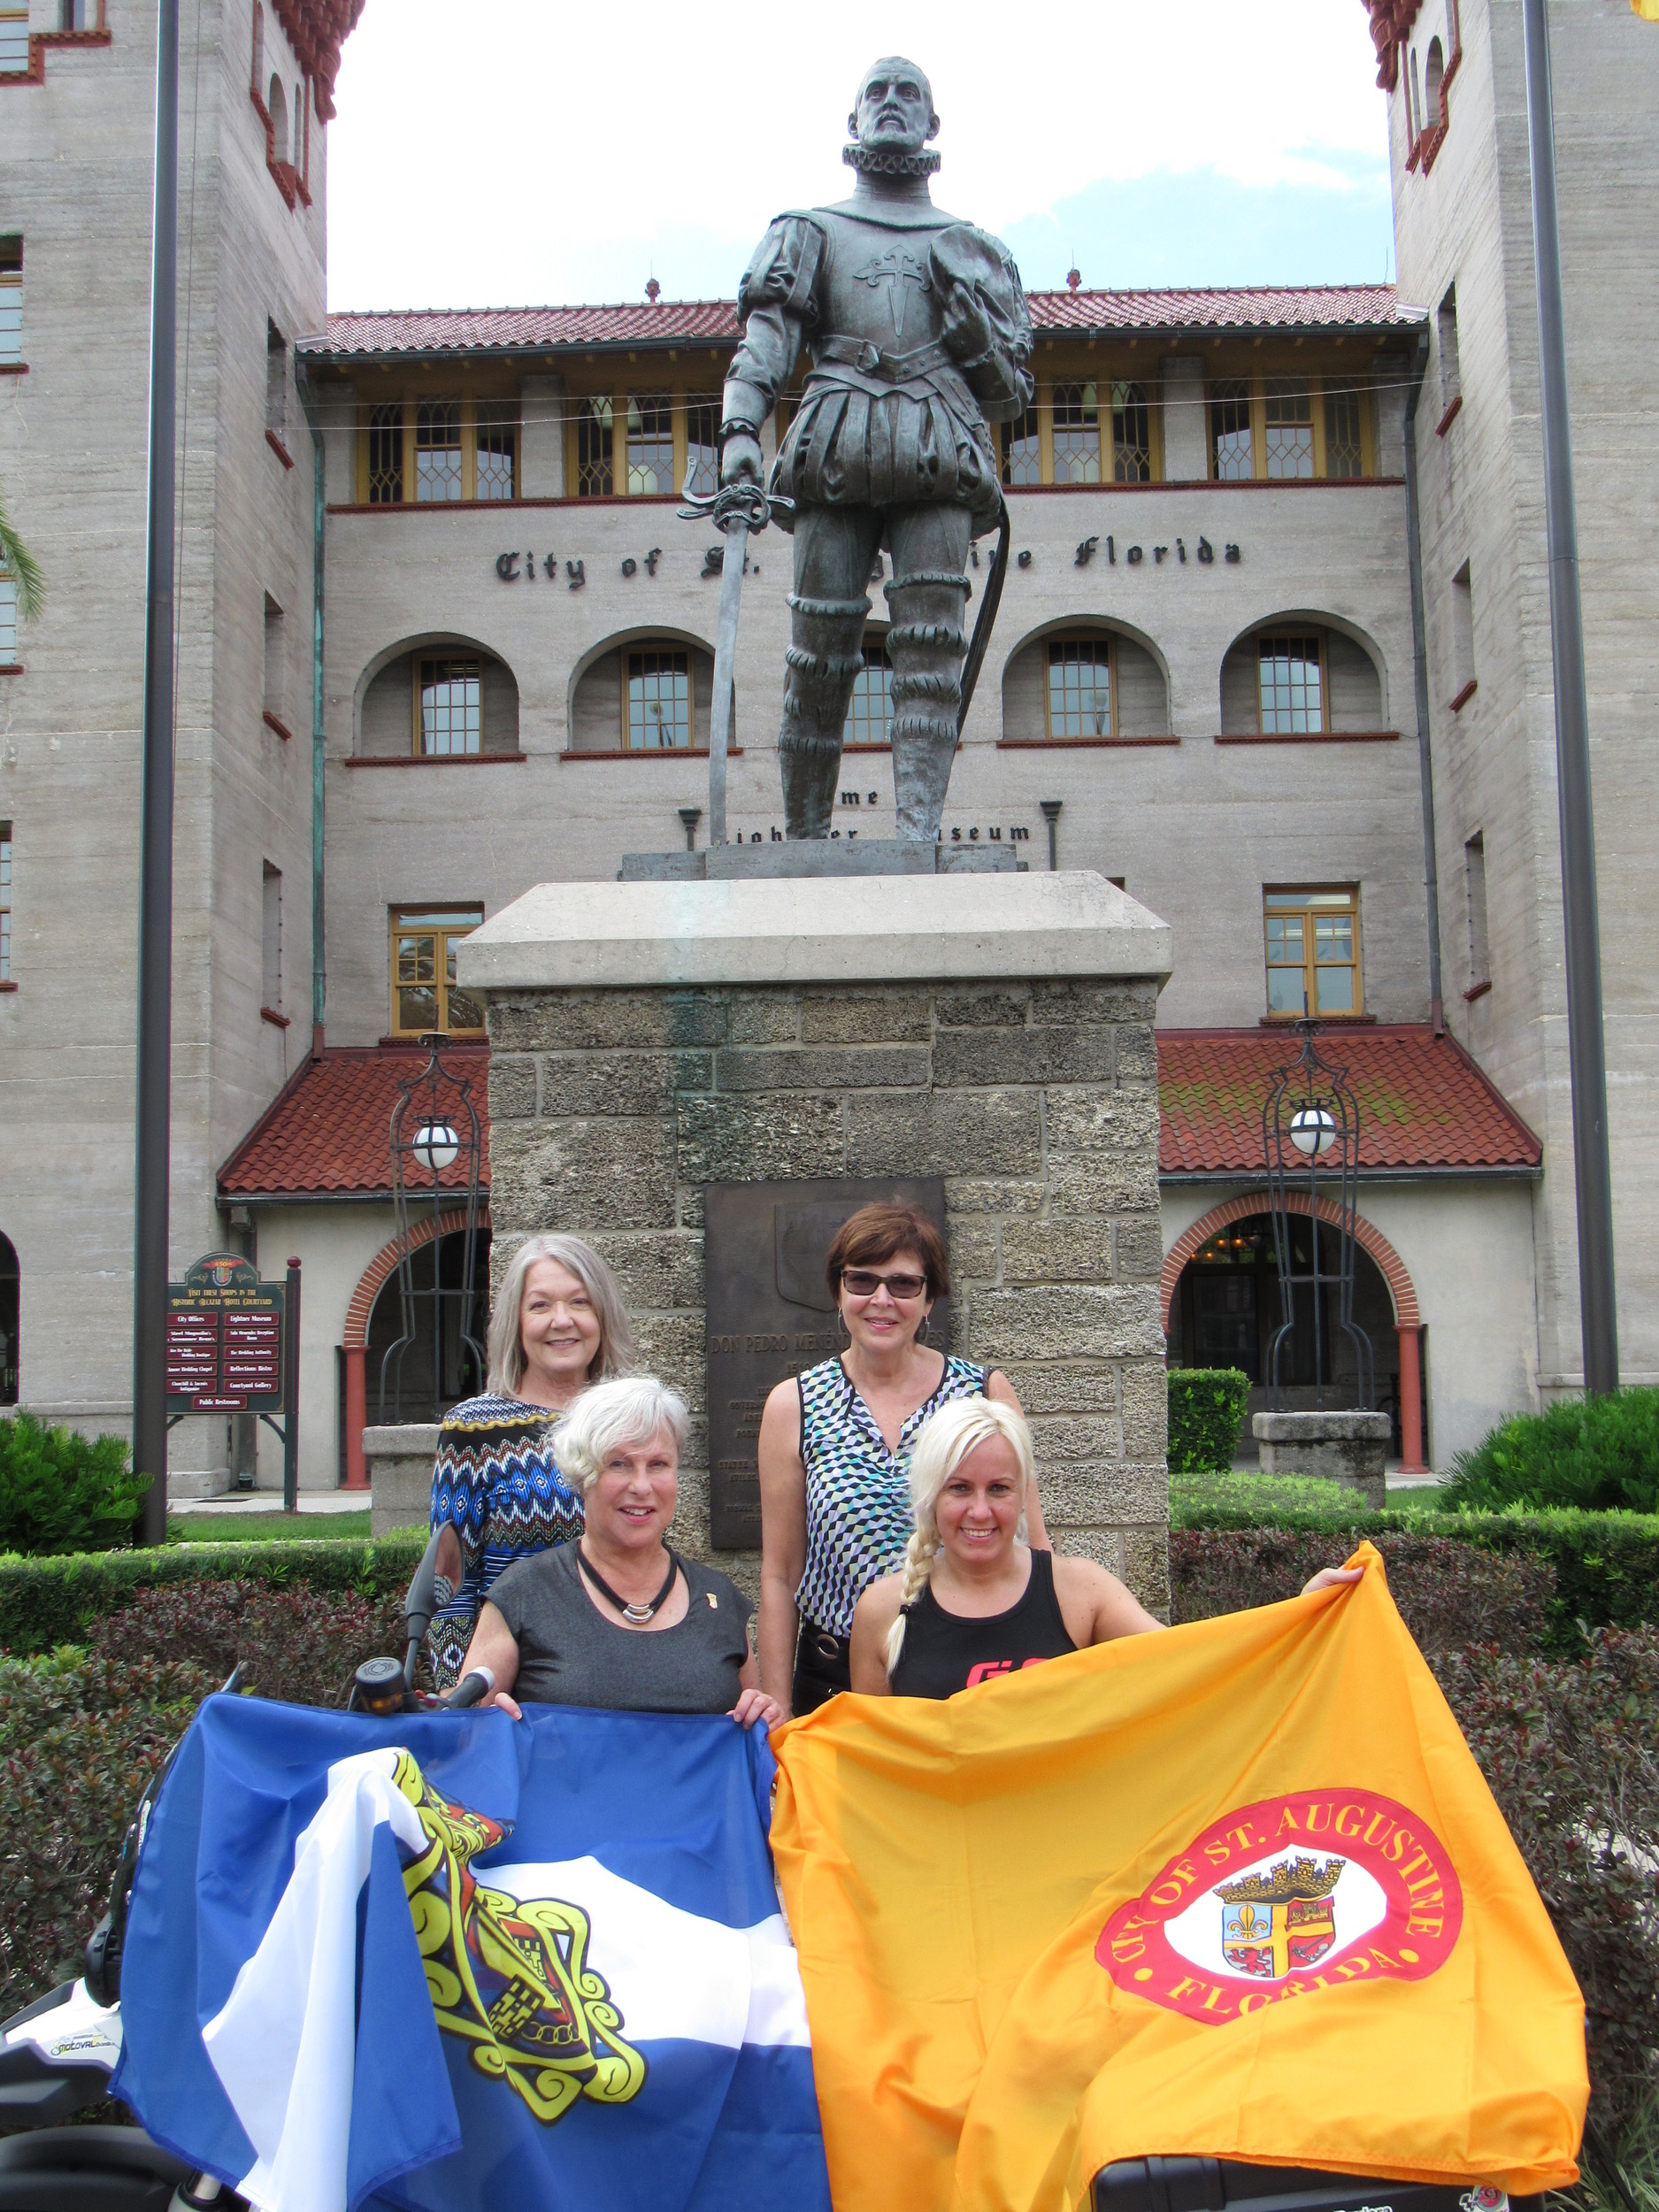 Sonia Barbosa of Aviles poses with St. Augustine Mayor Nancy Shaver and members of the city commission after the flag exchange ceremony. Barbosa had her motorcycle shipped to New York City and rode it down to St. Augustine for the Aug. 26 ceremony.